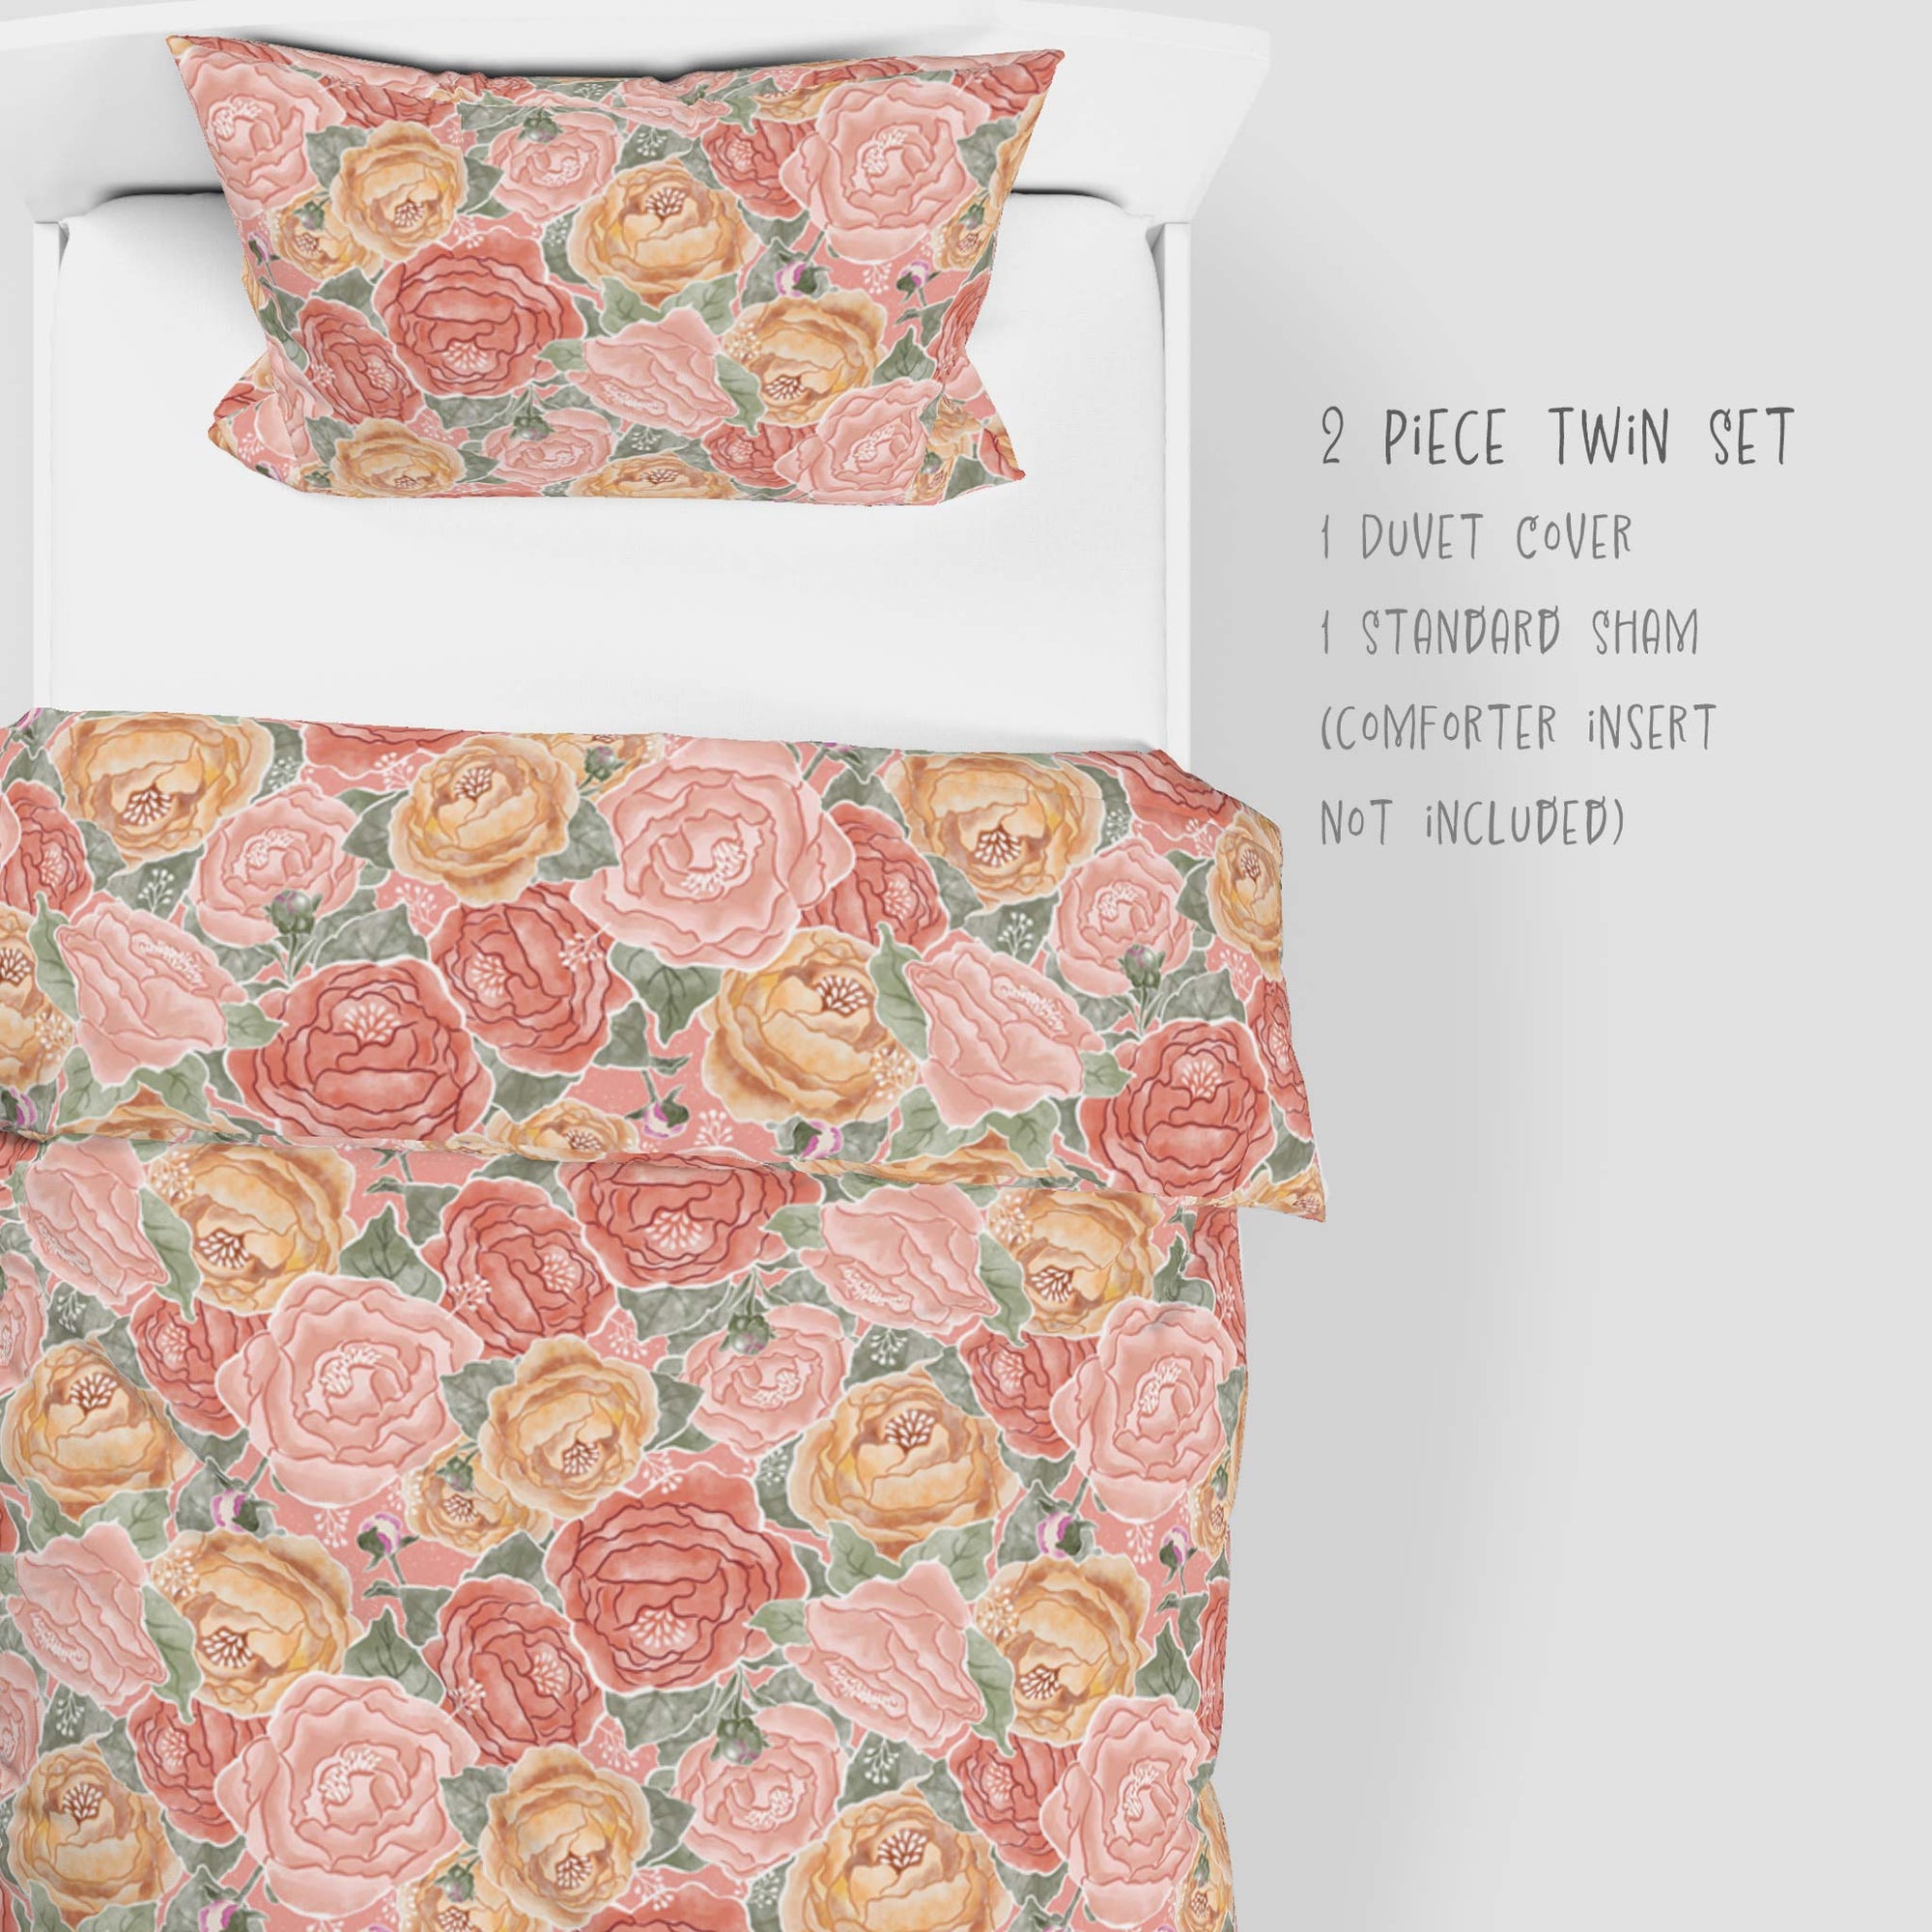 Pretty in Peony Bedding Collection with Sage Background. Twin comes as a 2 piece set: 1 sham and duvet or as 4 piece set: 1 sham, duvet, 1 throw pillow, and 1 lumbar